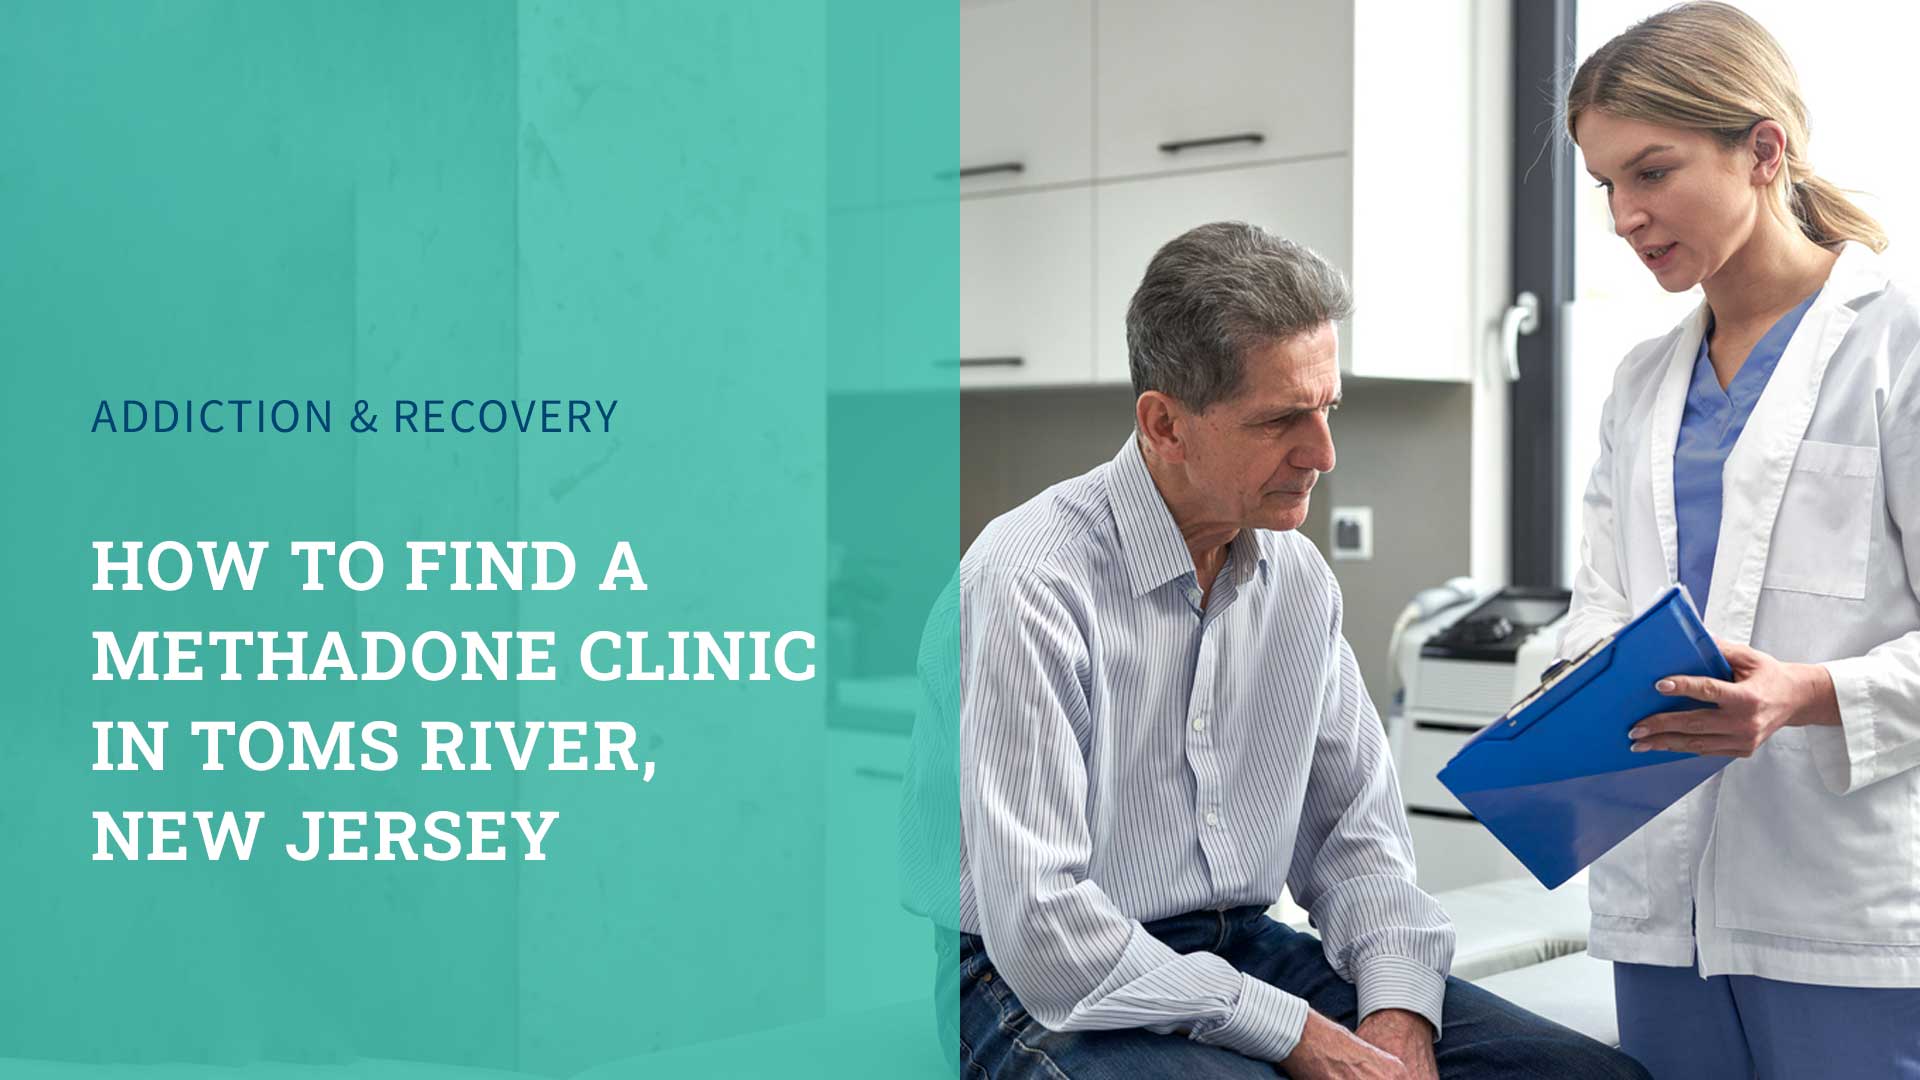 How to Find a Methadone Clinic in Toms River, New Jersey